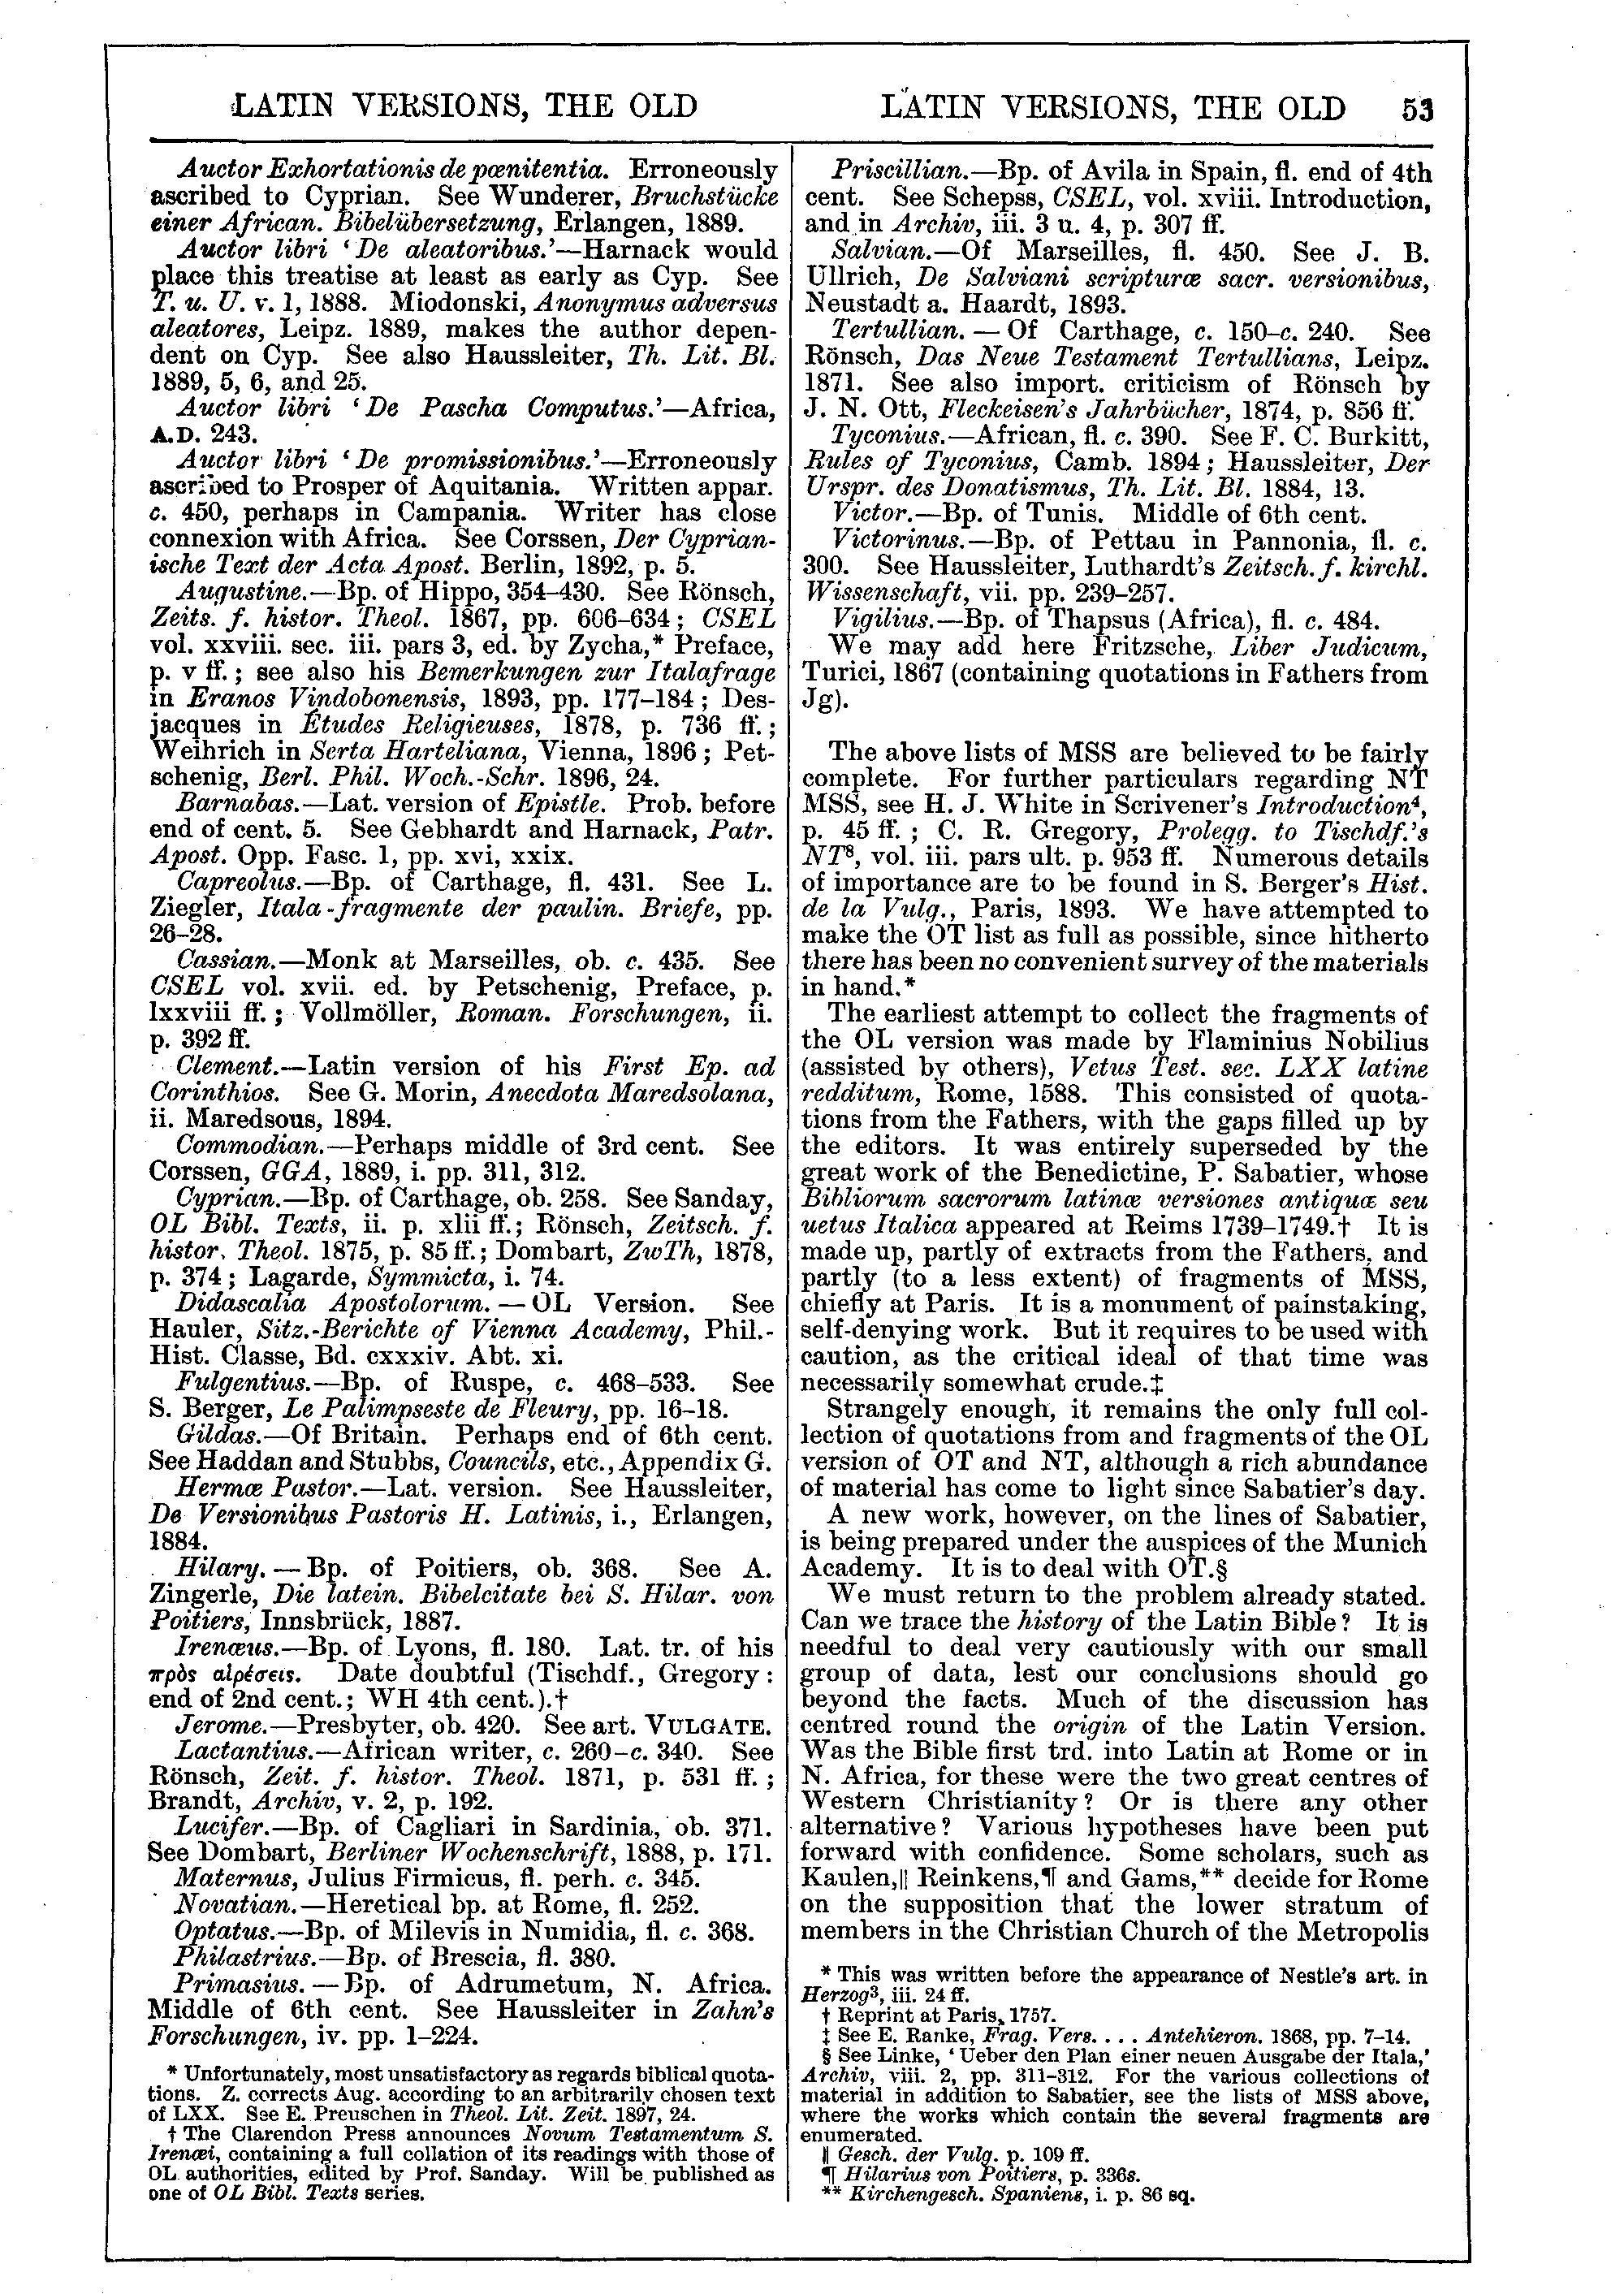 Image of page 53